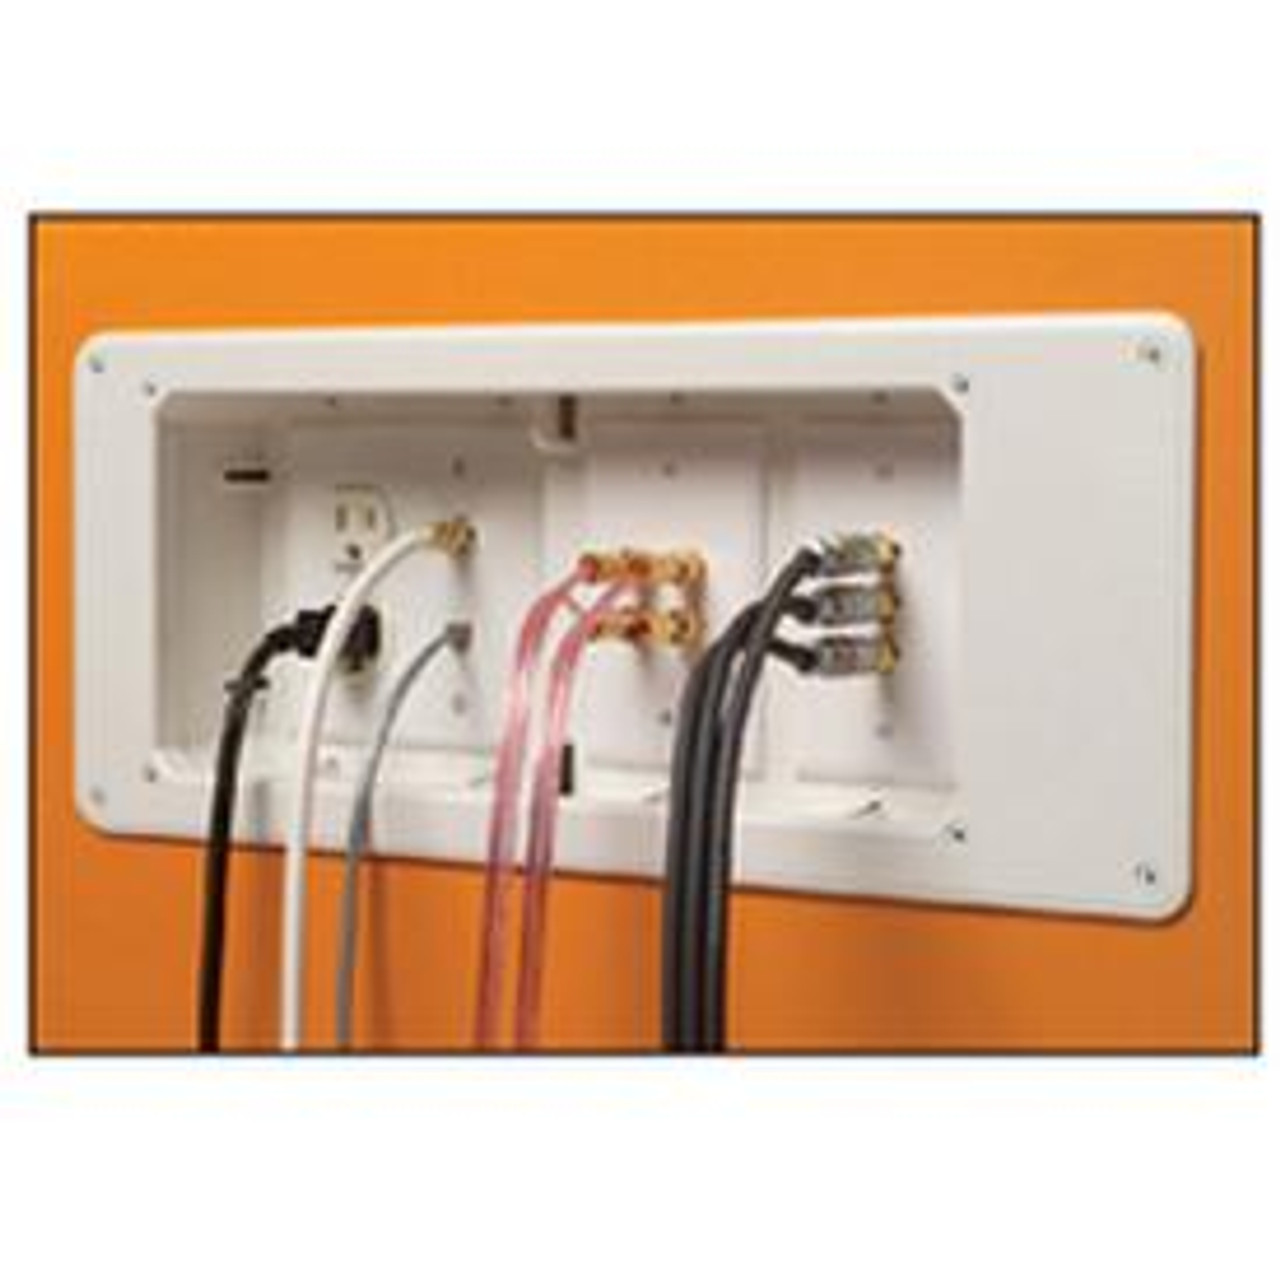 Mounting Box For TV 4-Gang Power & Low Voltage Recessed